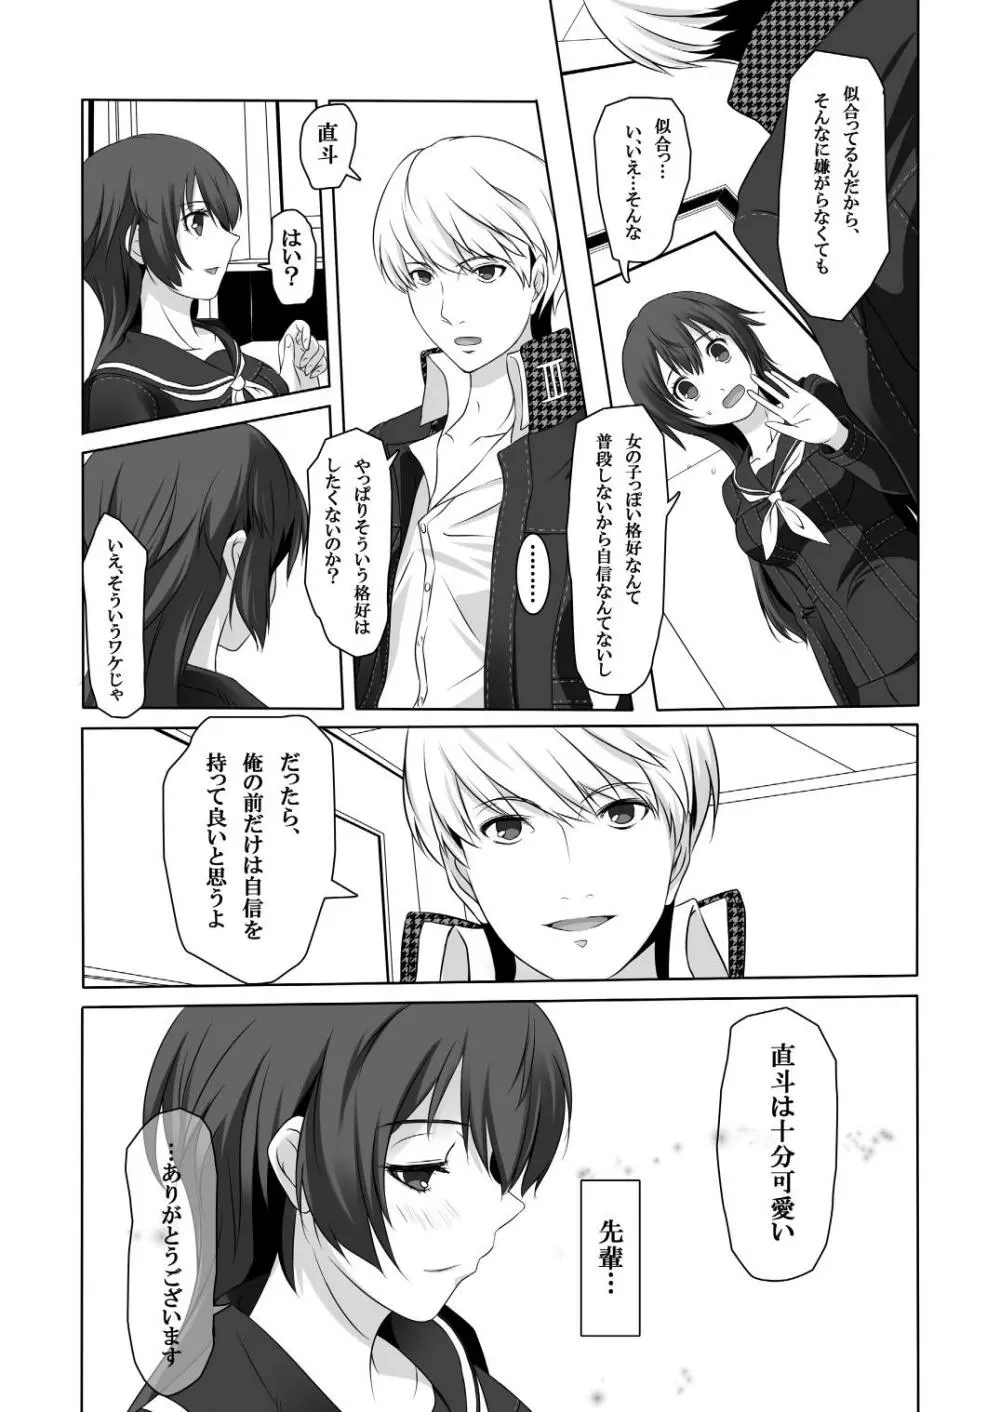 Persona 4: The Doujin #3 #4 Page.4